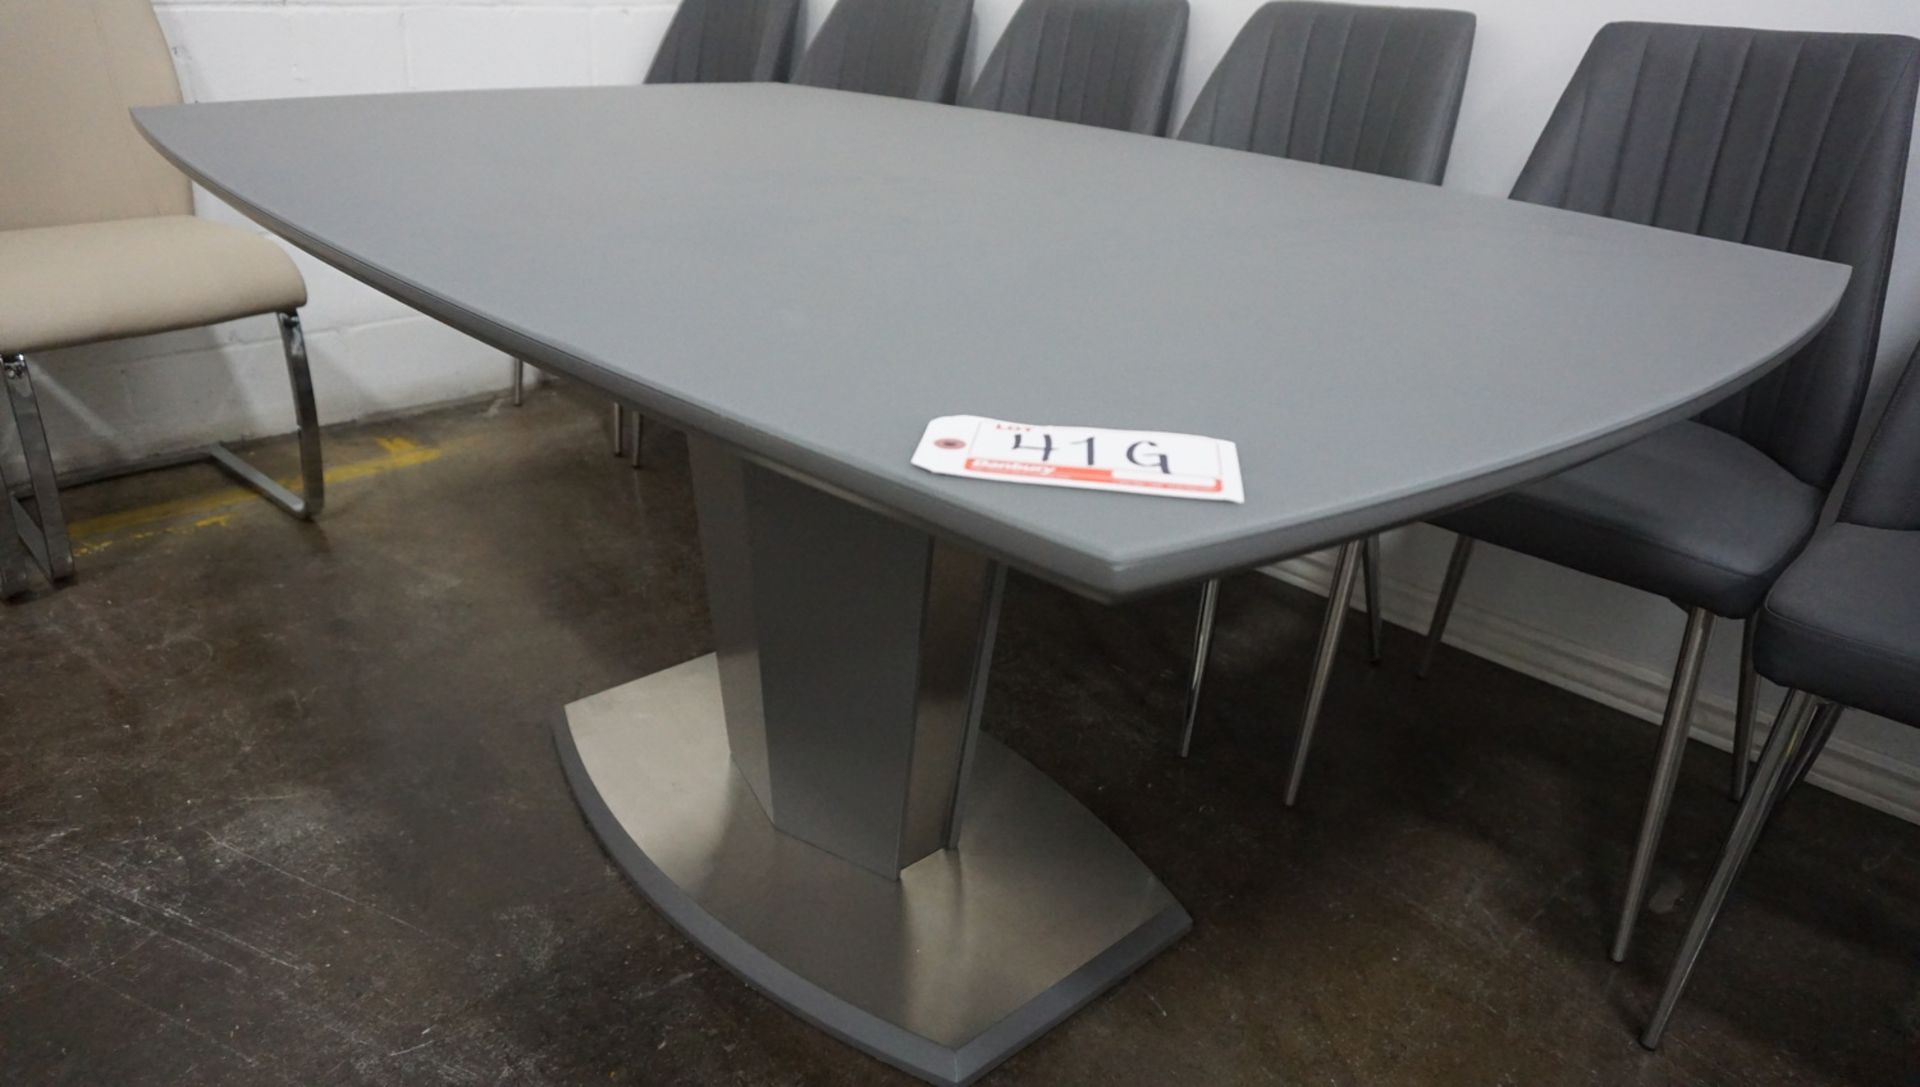 MATTE GREY 63" X 39.5" X 30"H DINING TABLE W/ STAINLESS STEEL ACCENTS AND SAND BLASTED GLASS ON